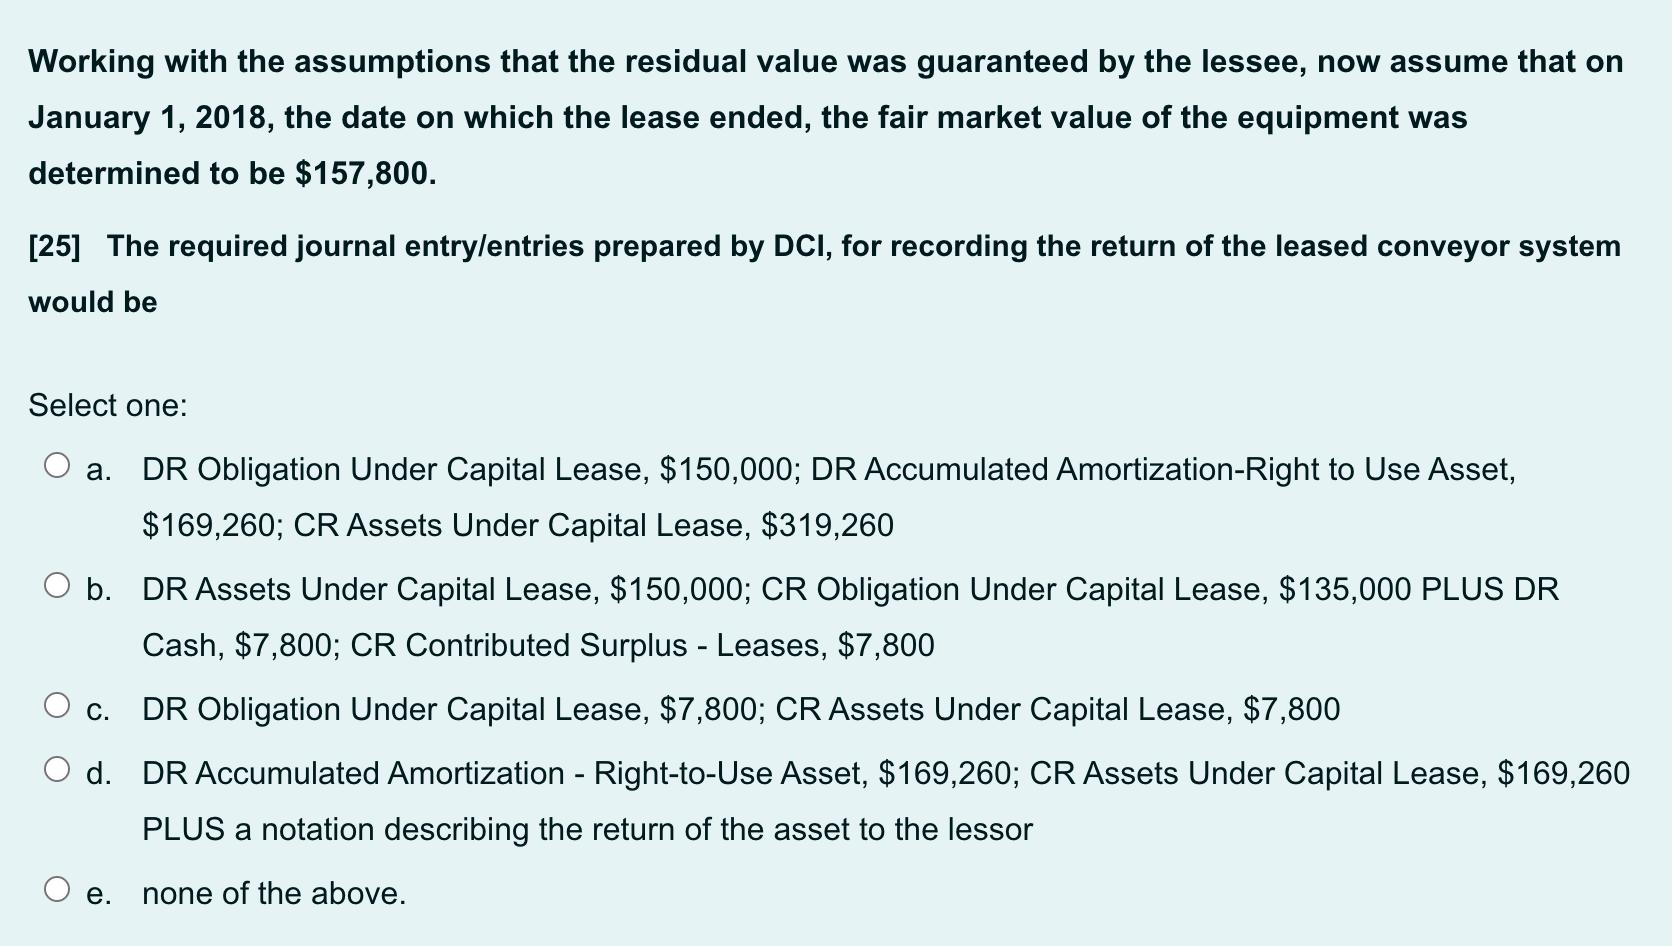 Working with the assumptions that the residual value was guaranteed by the lessee, now assume that on January 1, 2018, the da